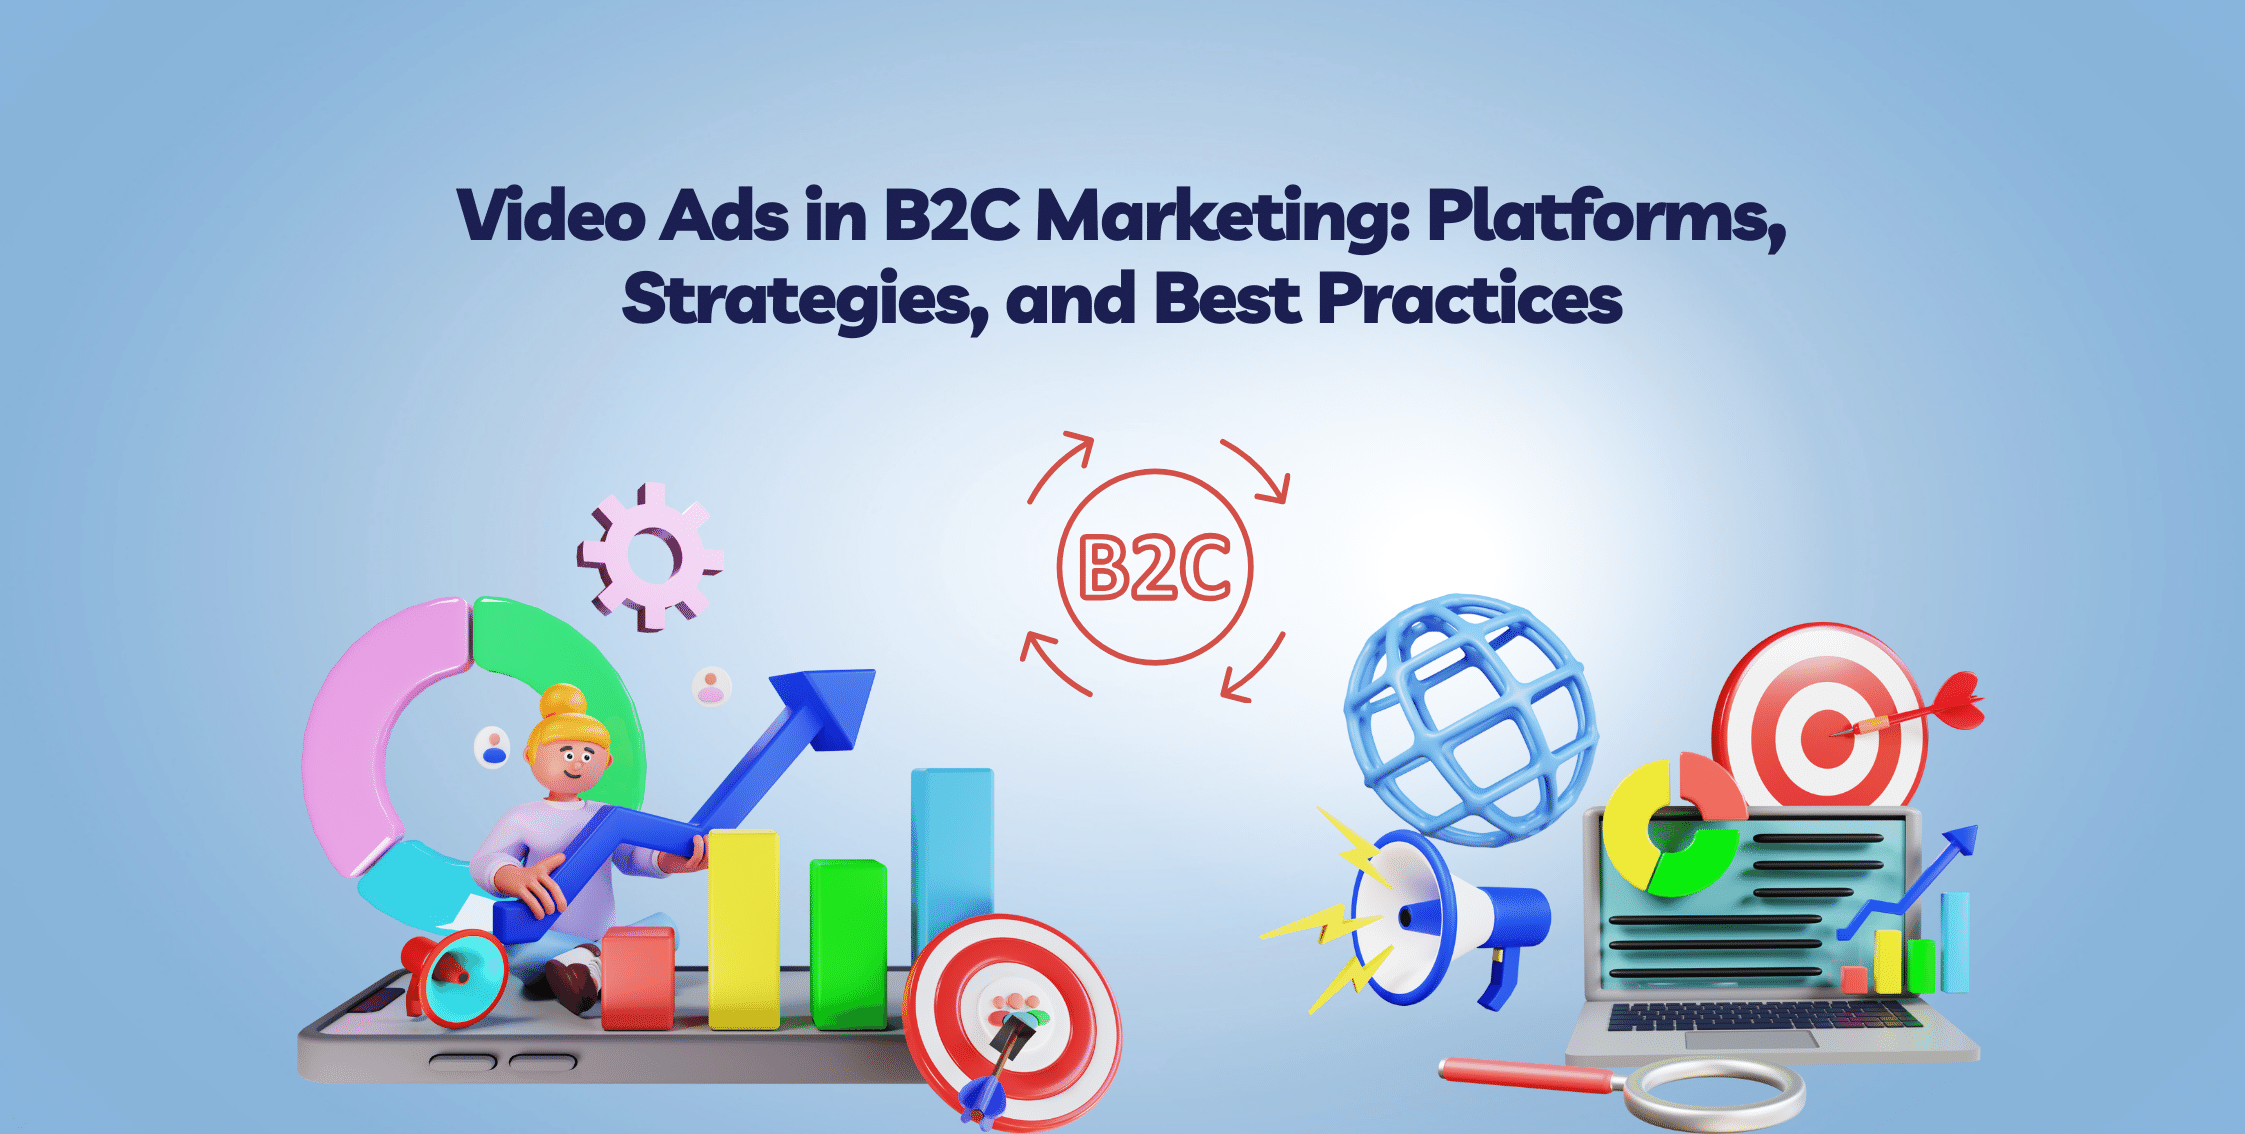 Video Ads in B2C Marketing: Platform, Strategies, and Best Practices